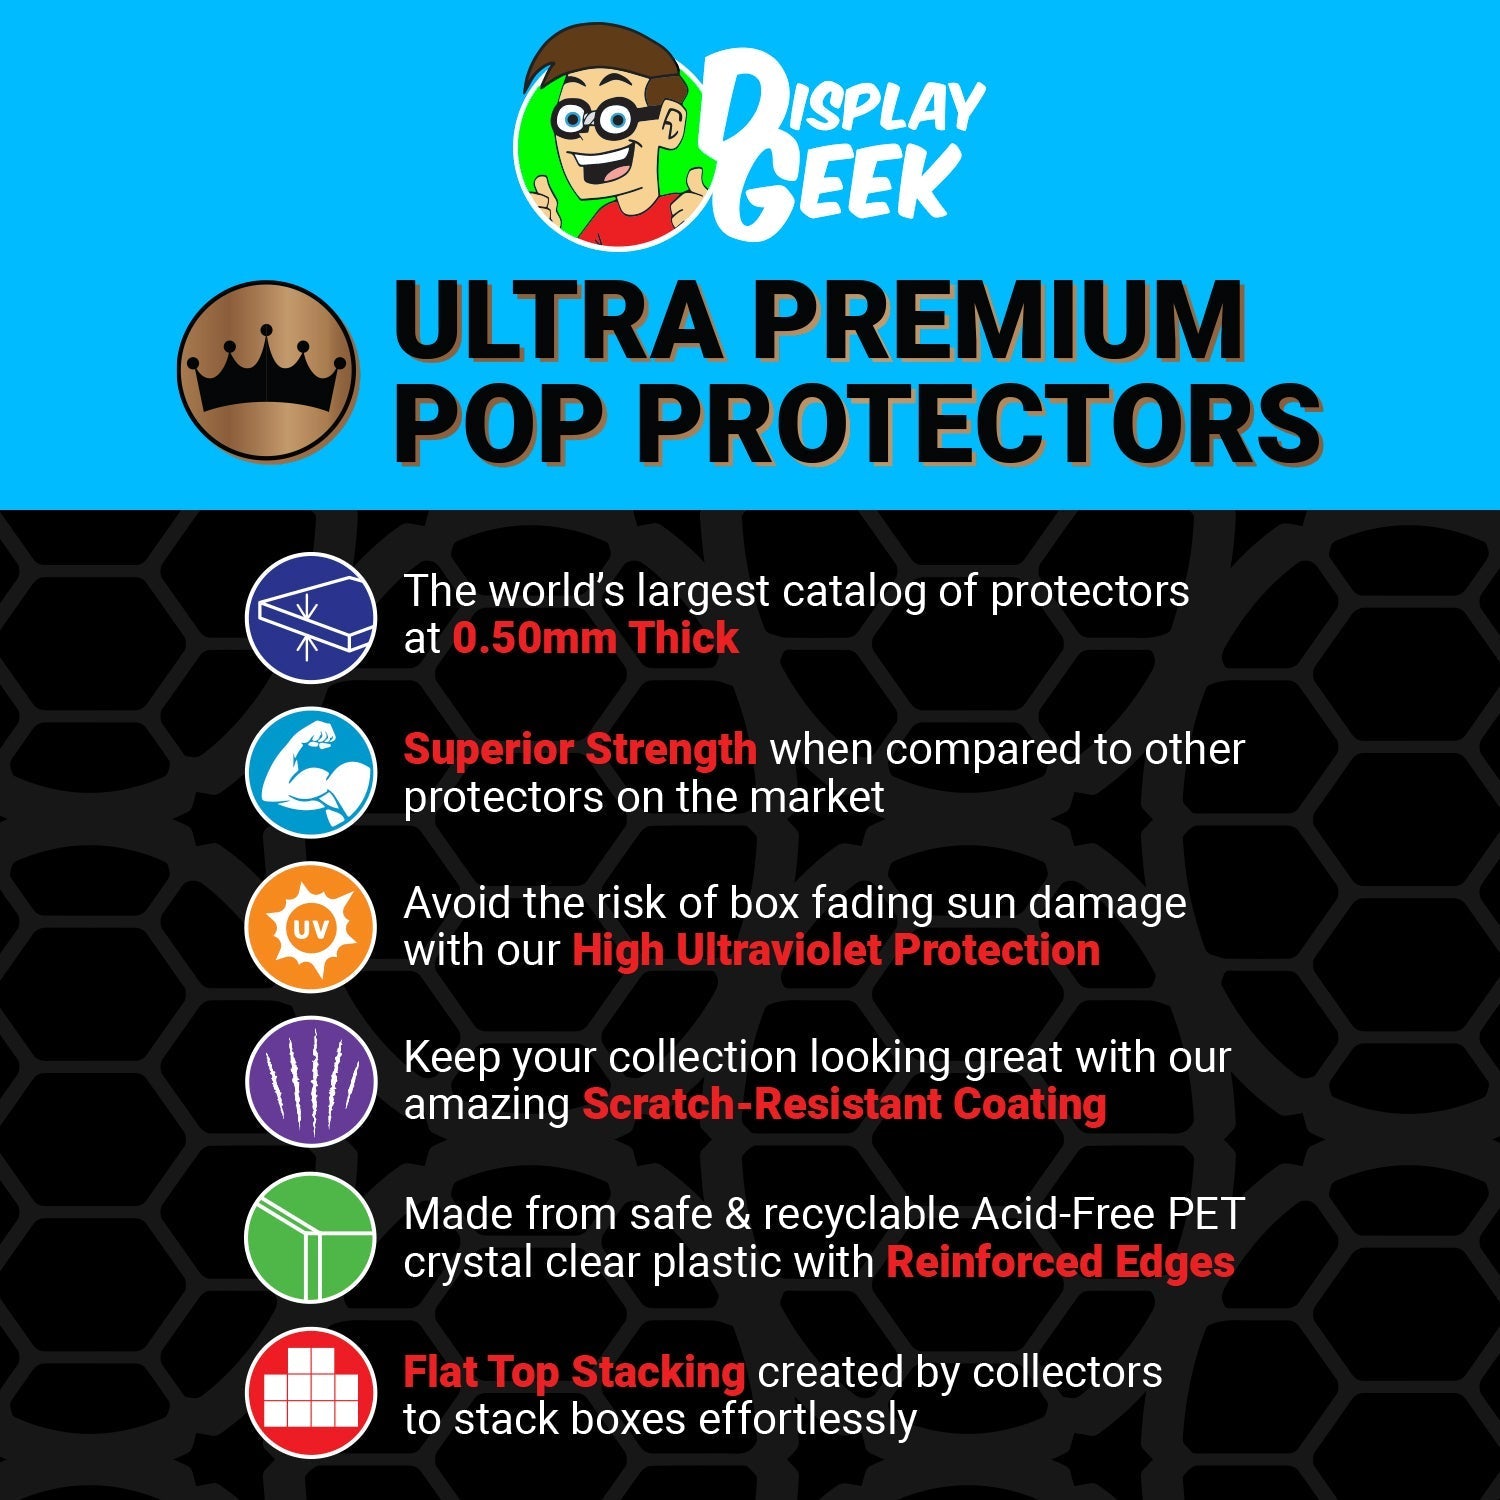 Pop Protector for Belle & the Beast #1141 Funko Pop Moment - PPG Pop Protector Guide Search Created by Display Geek